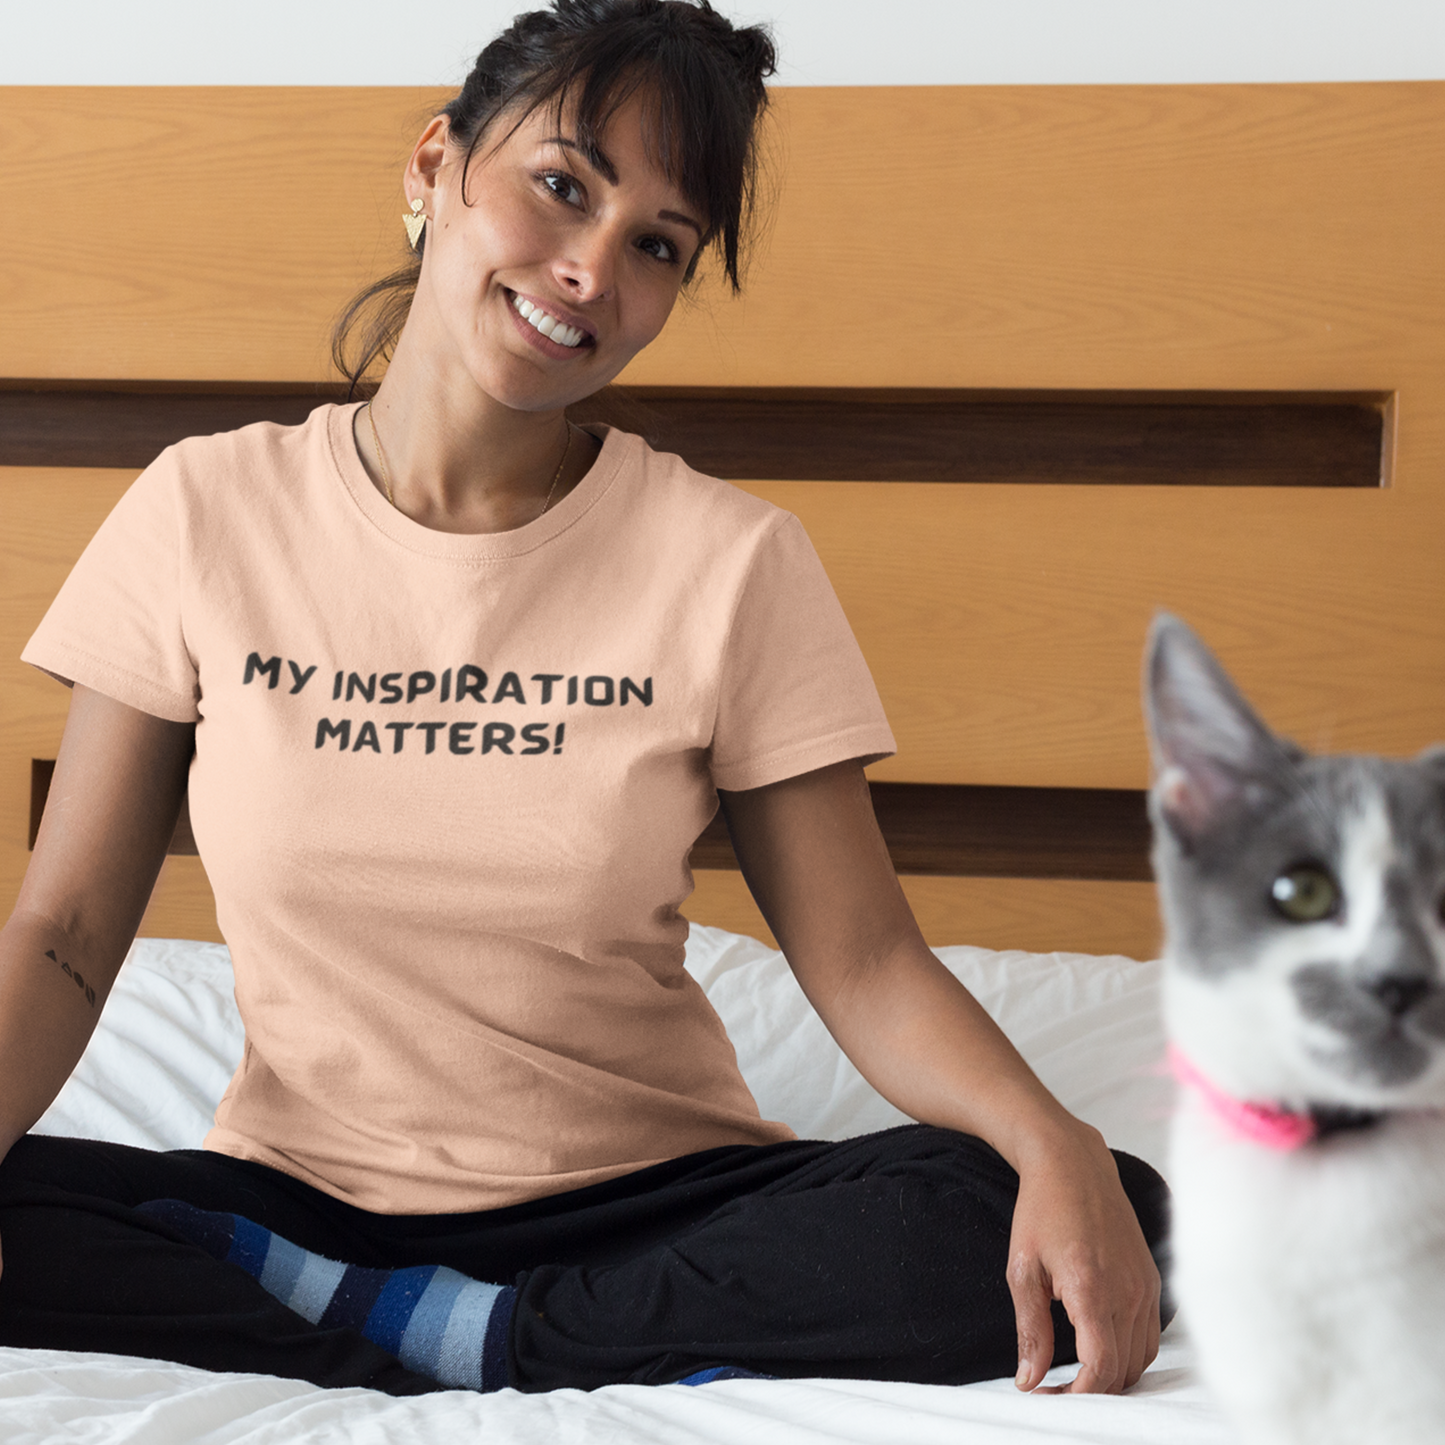 My inspiration matters unisex t shirt, T shirt gift with inspirational words tee shirt gift for friends